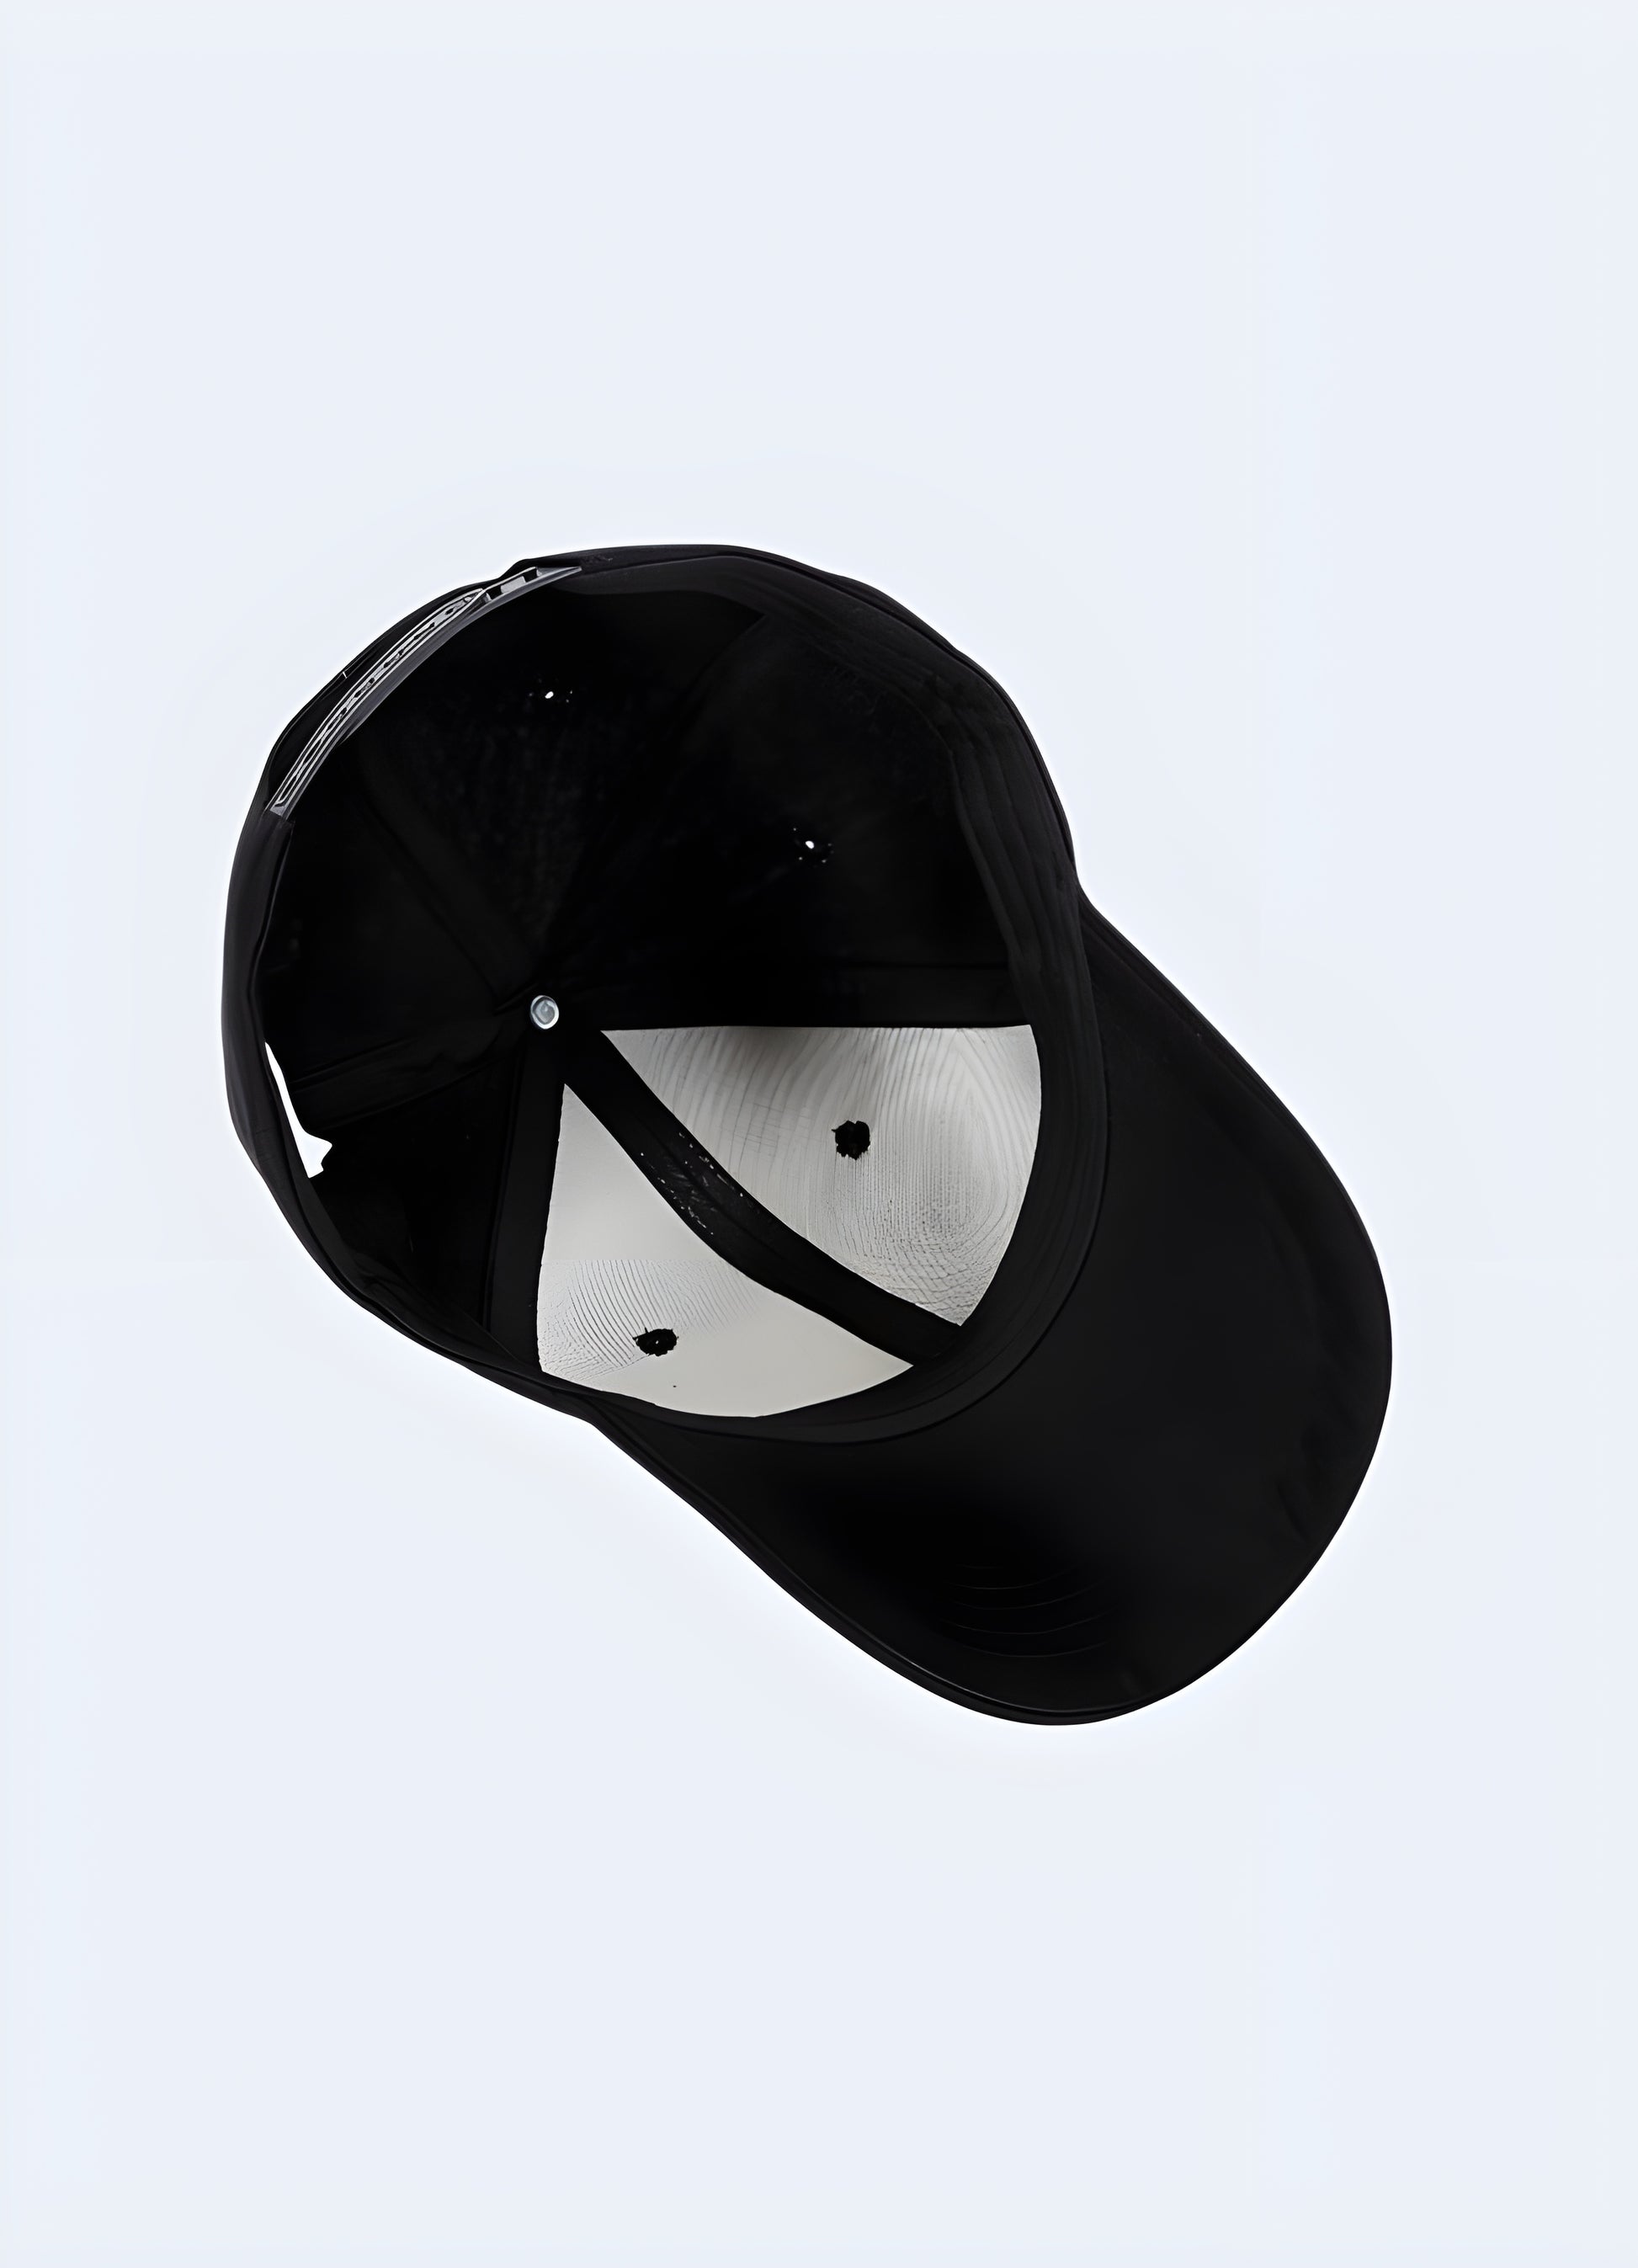  This stylish cap makes a fun and practical present for any occasion.